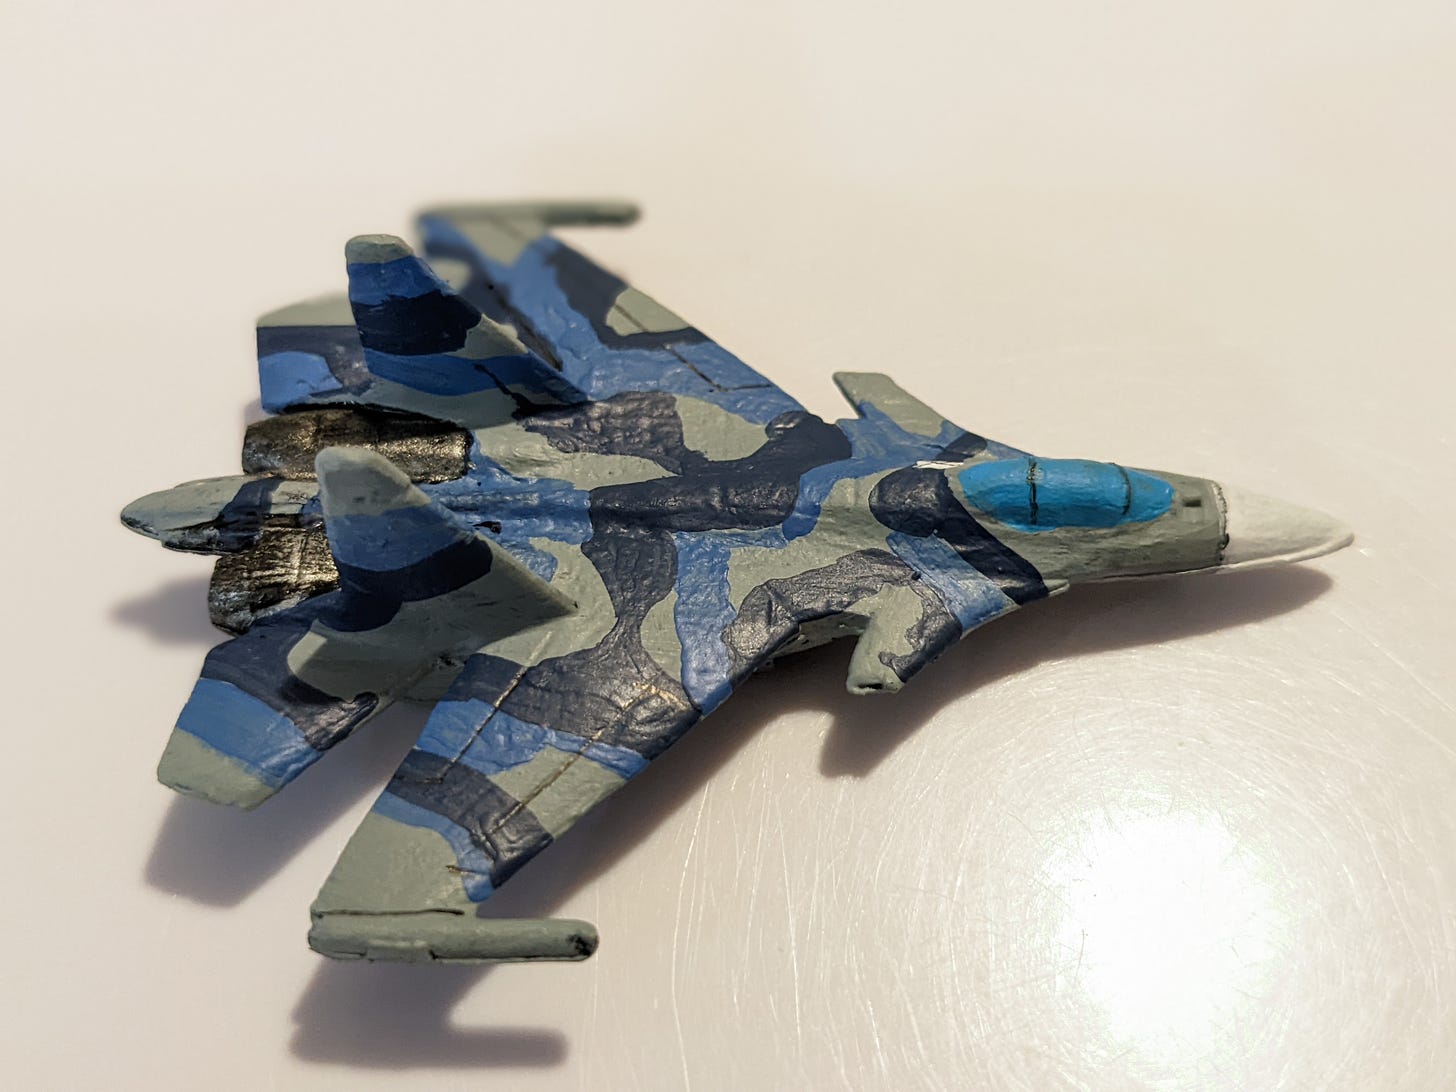 A 6 mm scale model of an SU-30/33 Russian fighter jet in blue, grey and dark blue camo